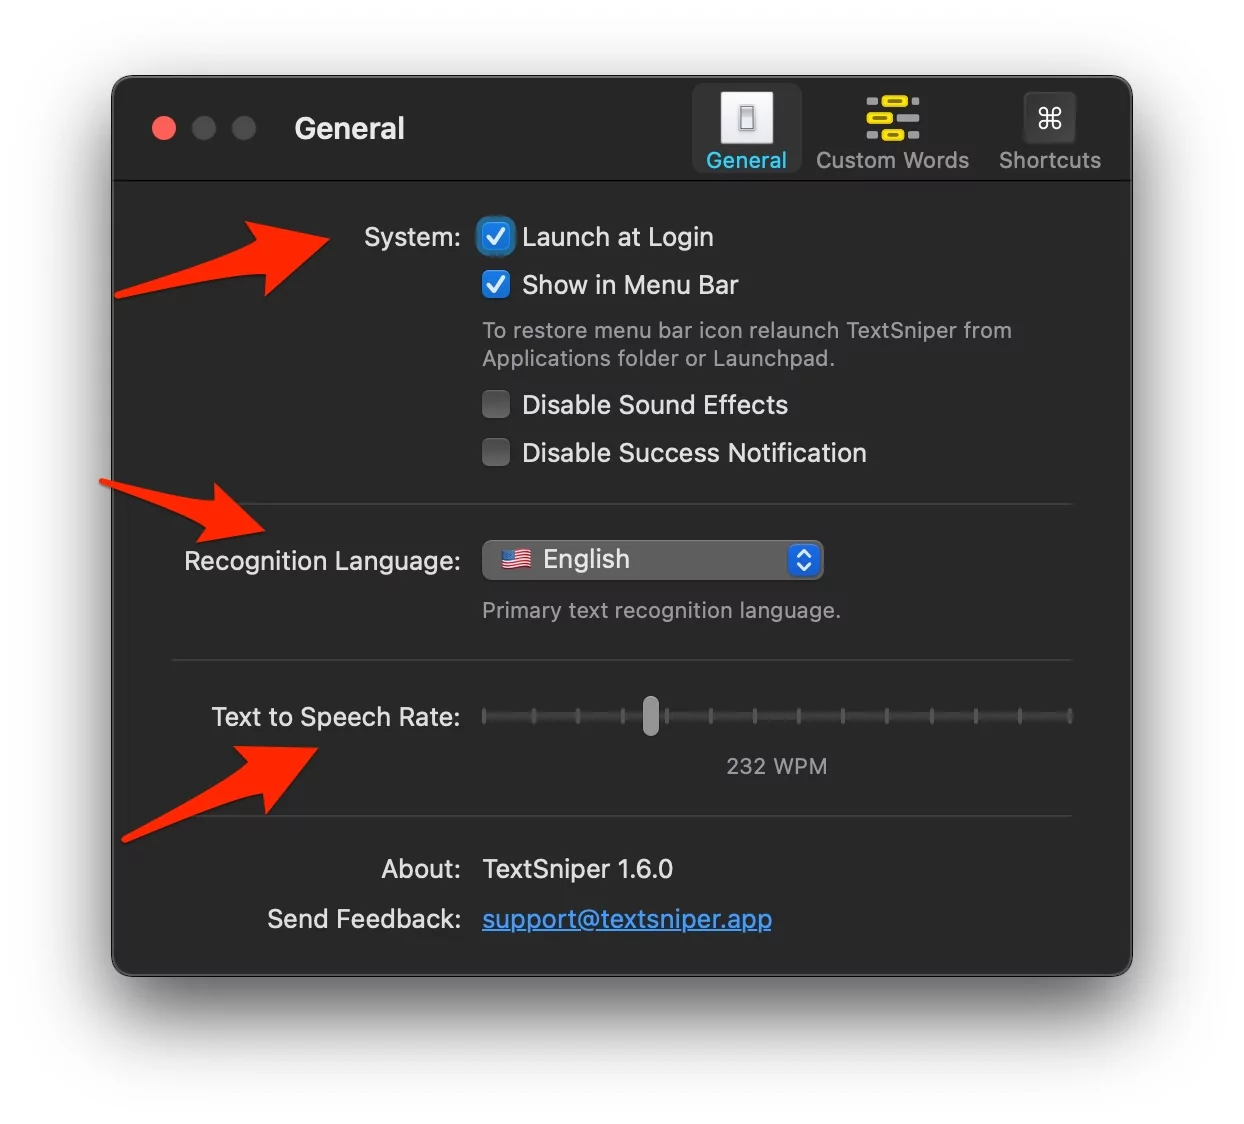 textsniper-preferences-settings-on-mac